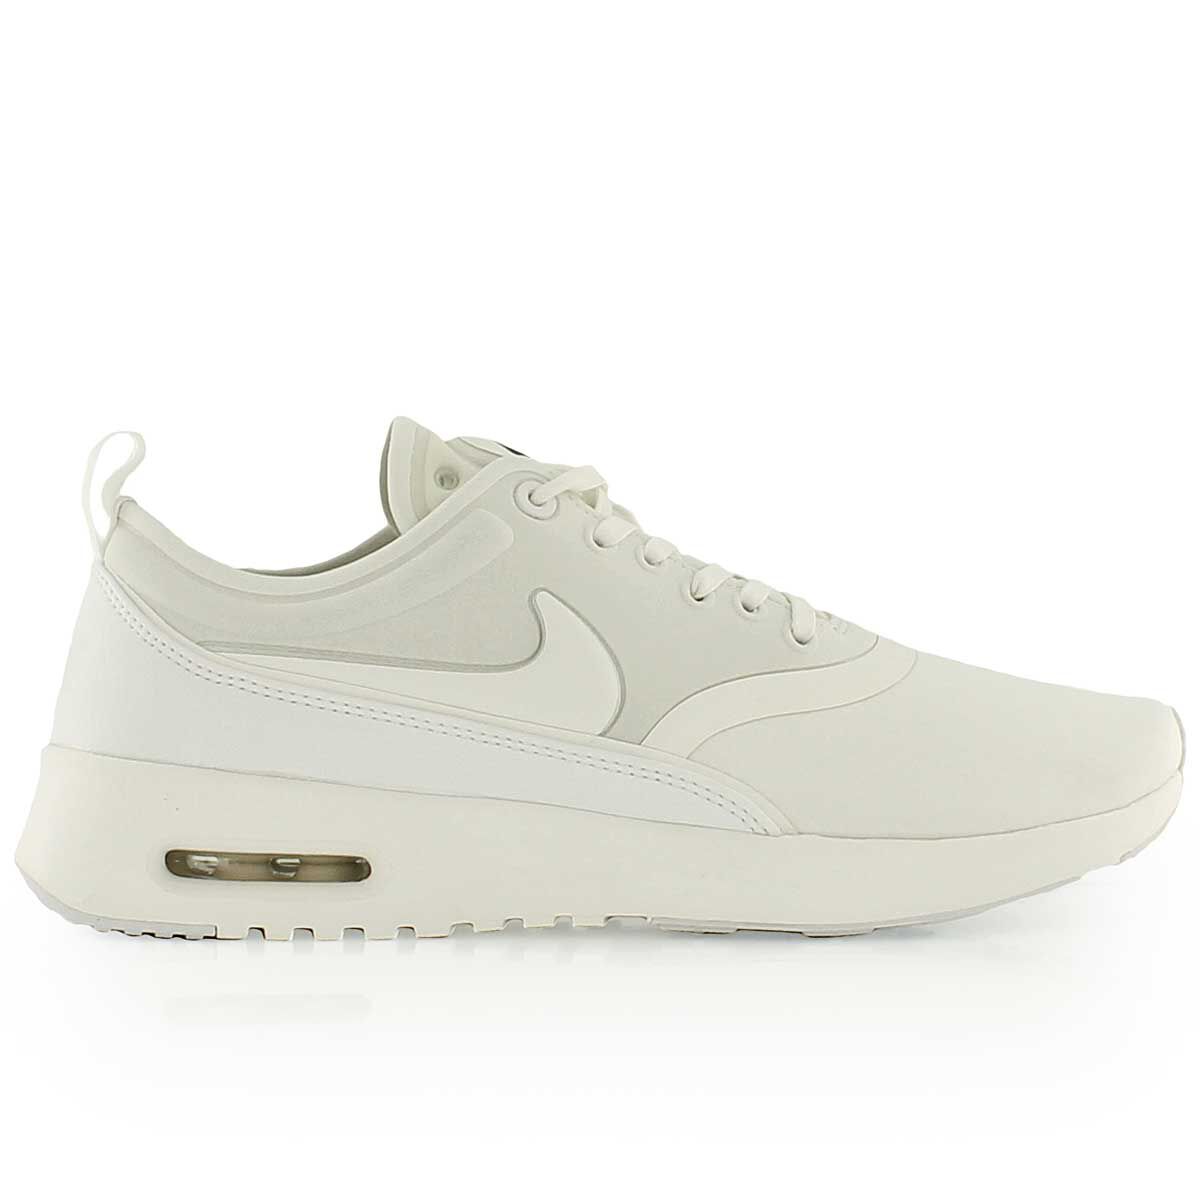 nike air max thea ultra trainers in cream and grey